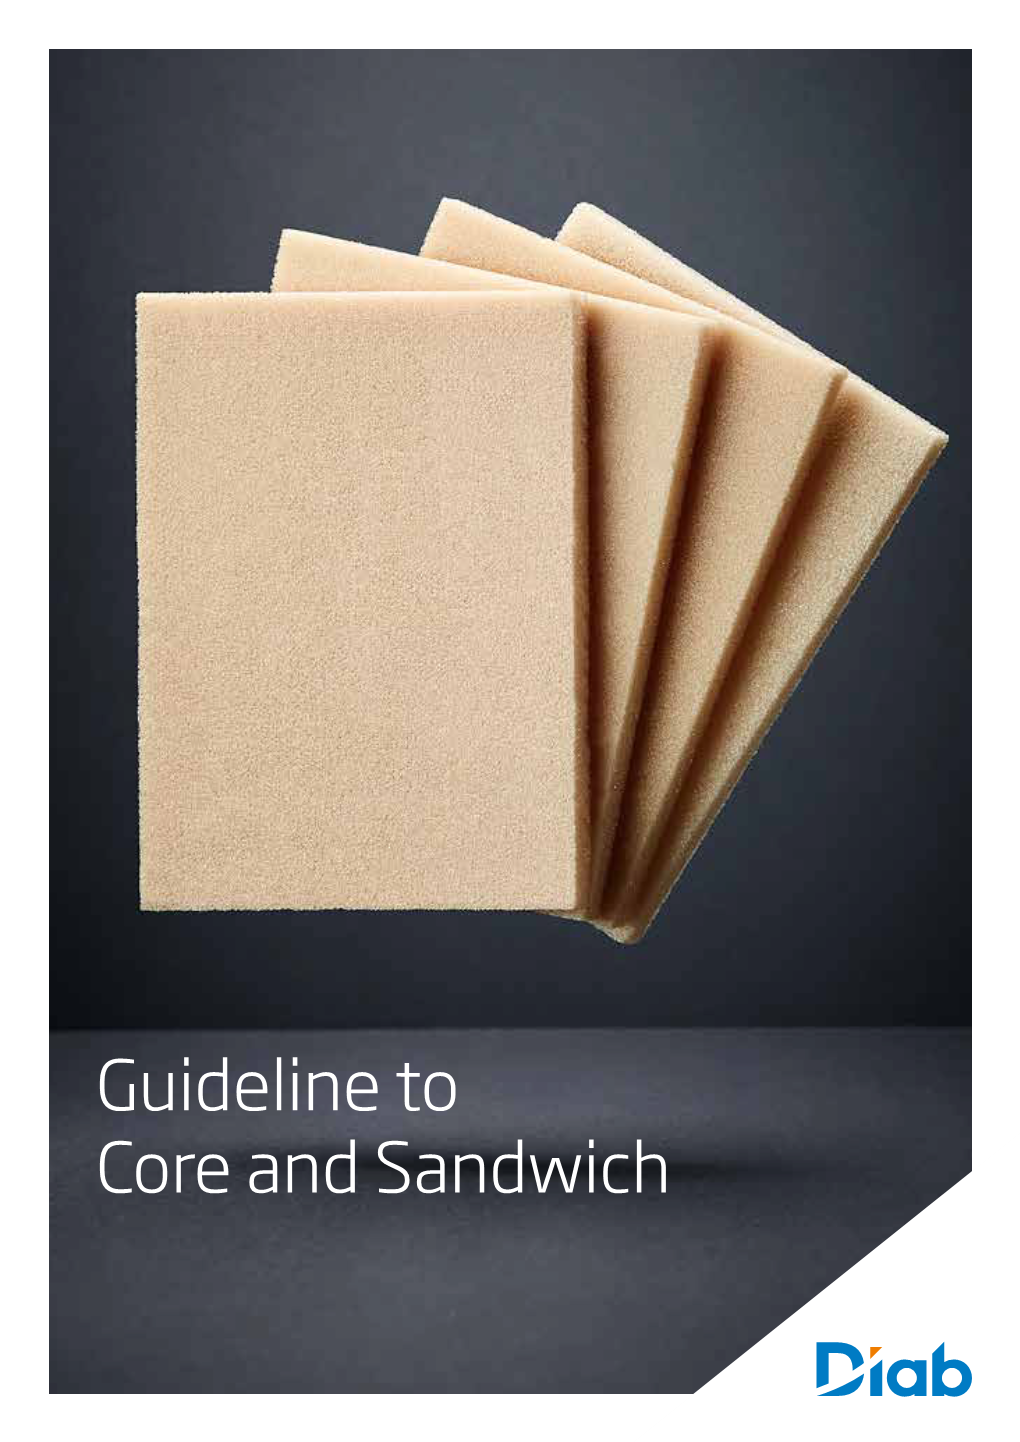 Diab Guideline to Core and Sandwich